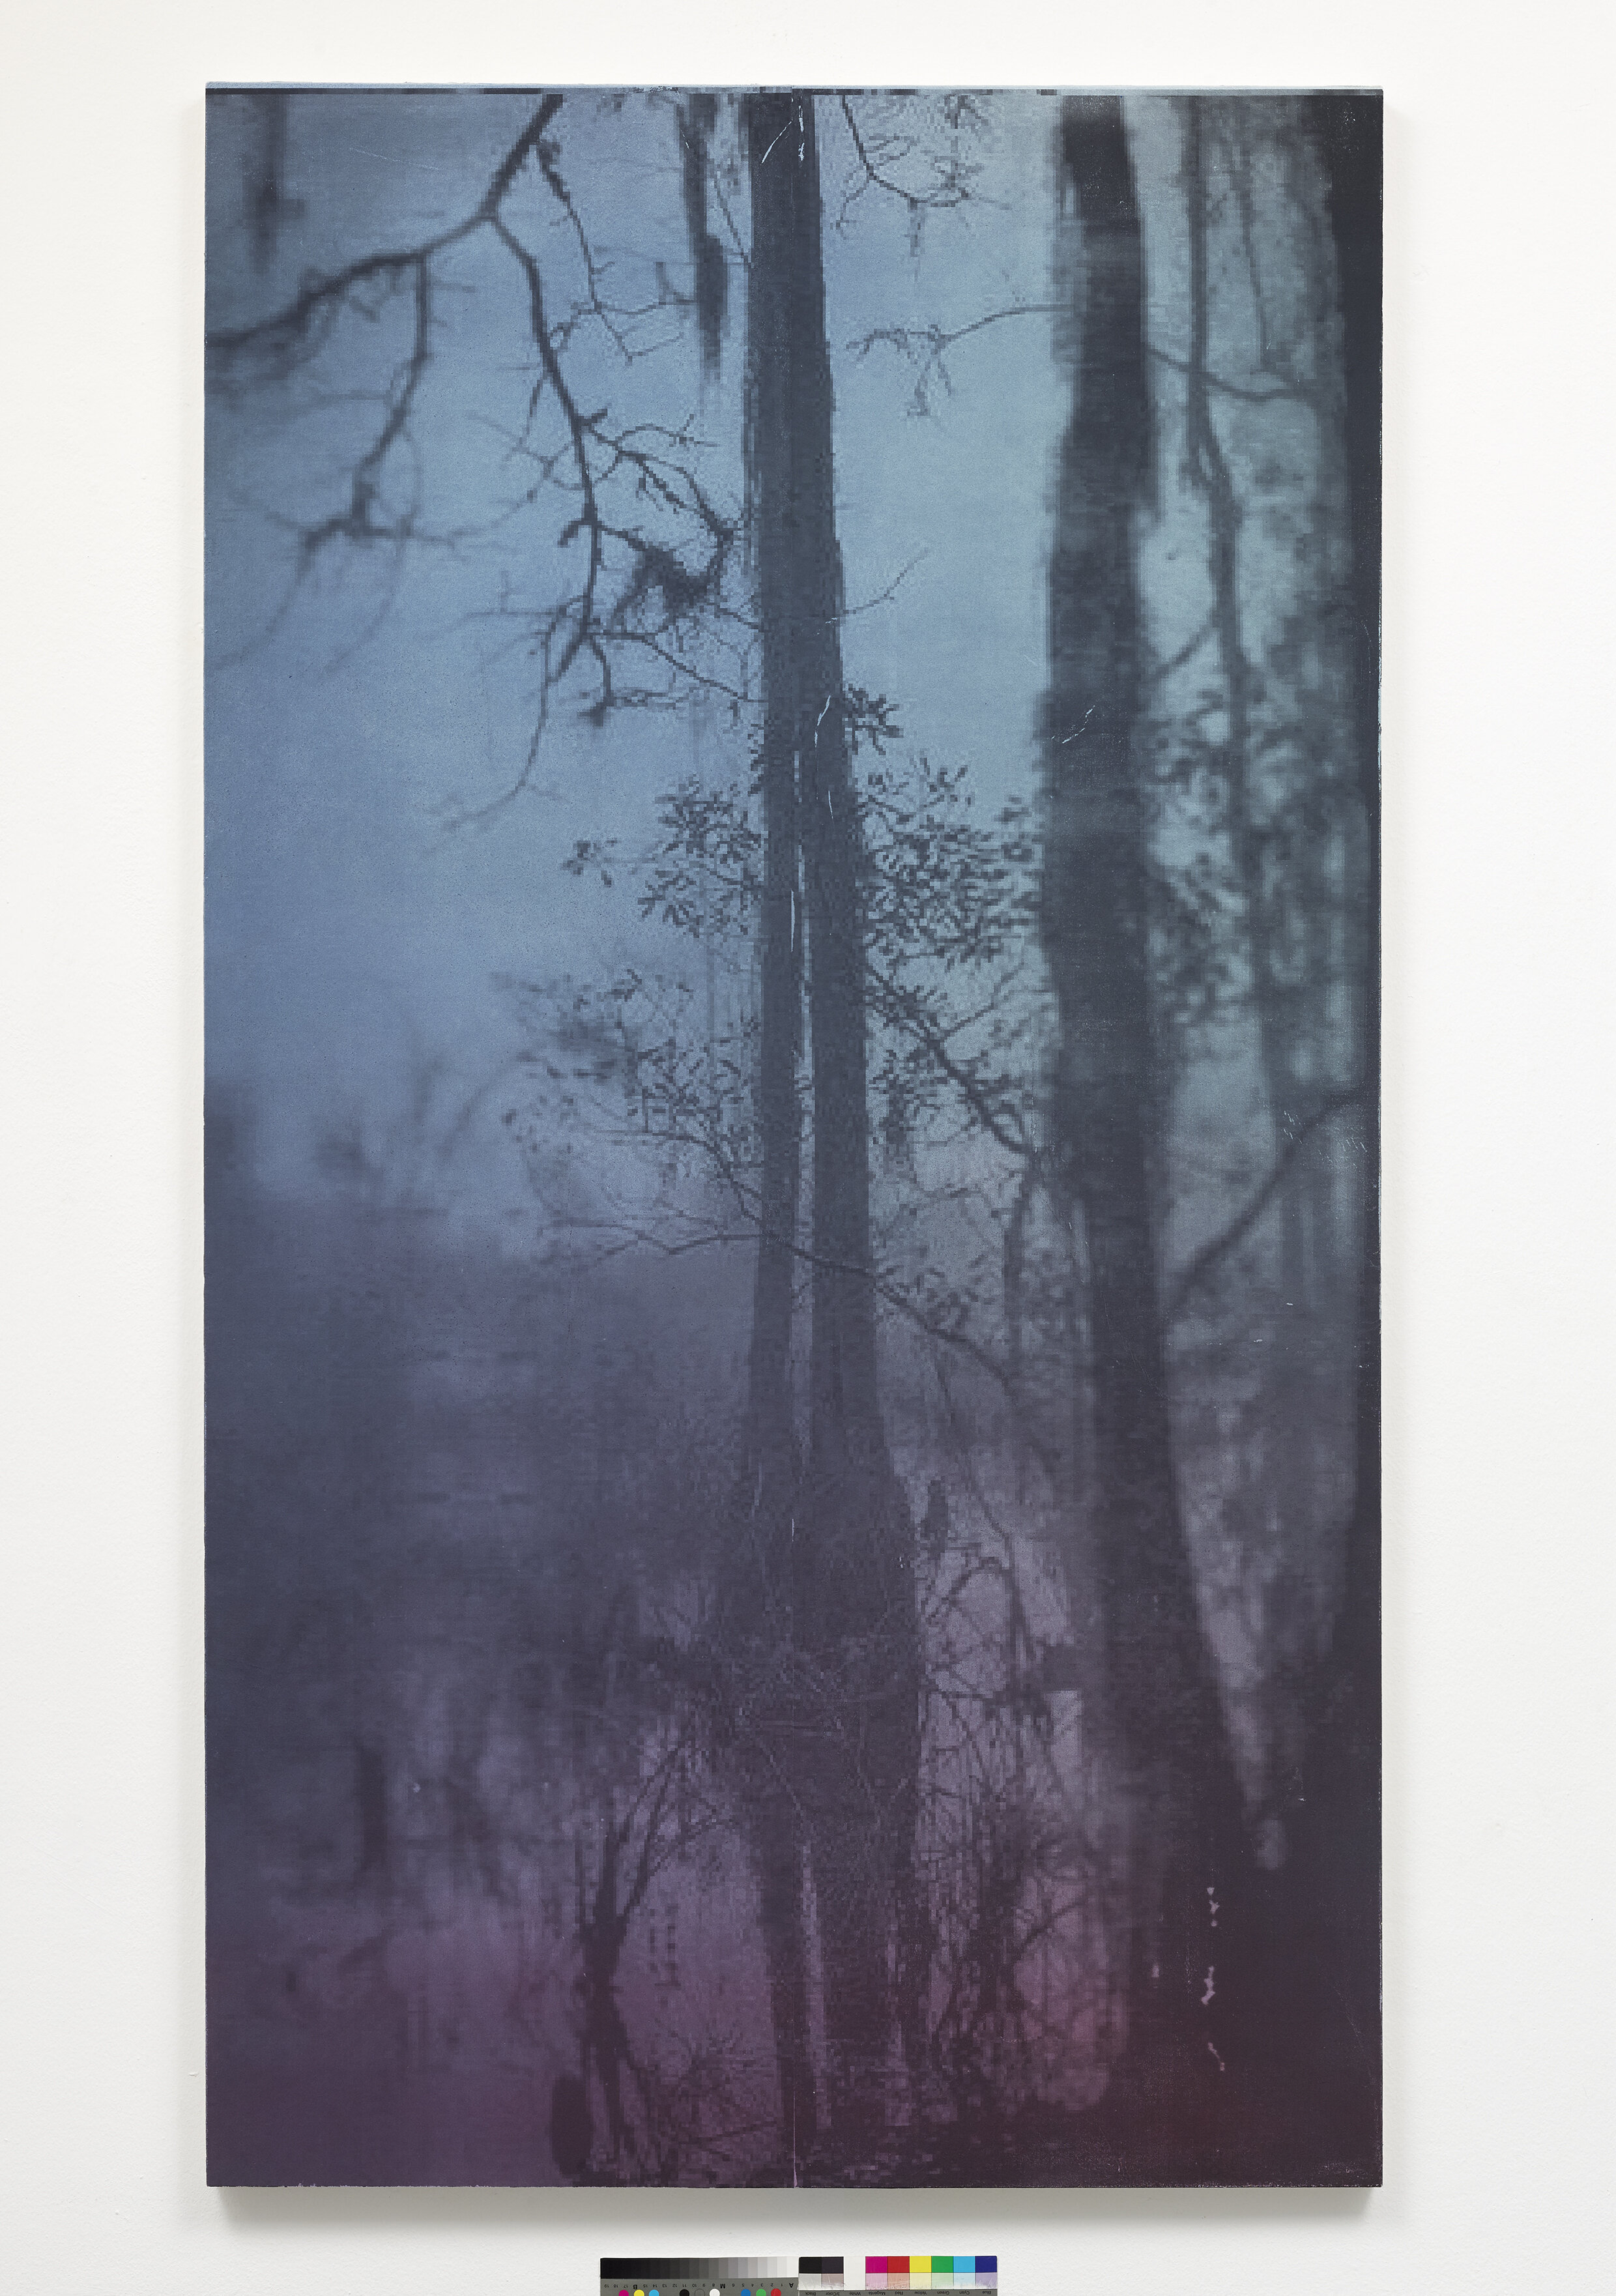   Untitled Painting: Red Over Violet to Green,  2015. Toner, acrylic and oil on canvas. 84 x 47 inches 